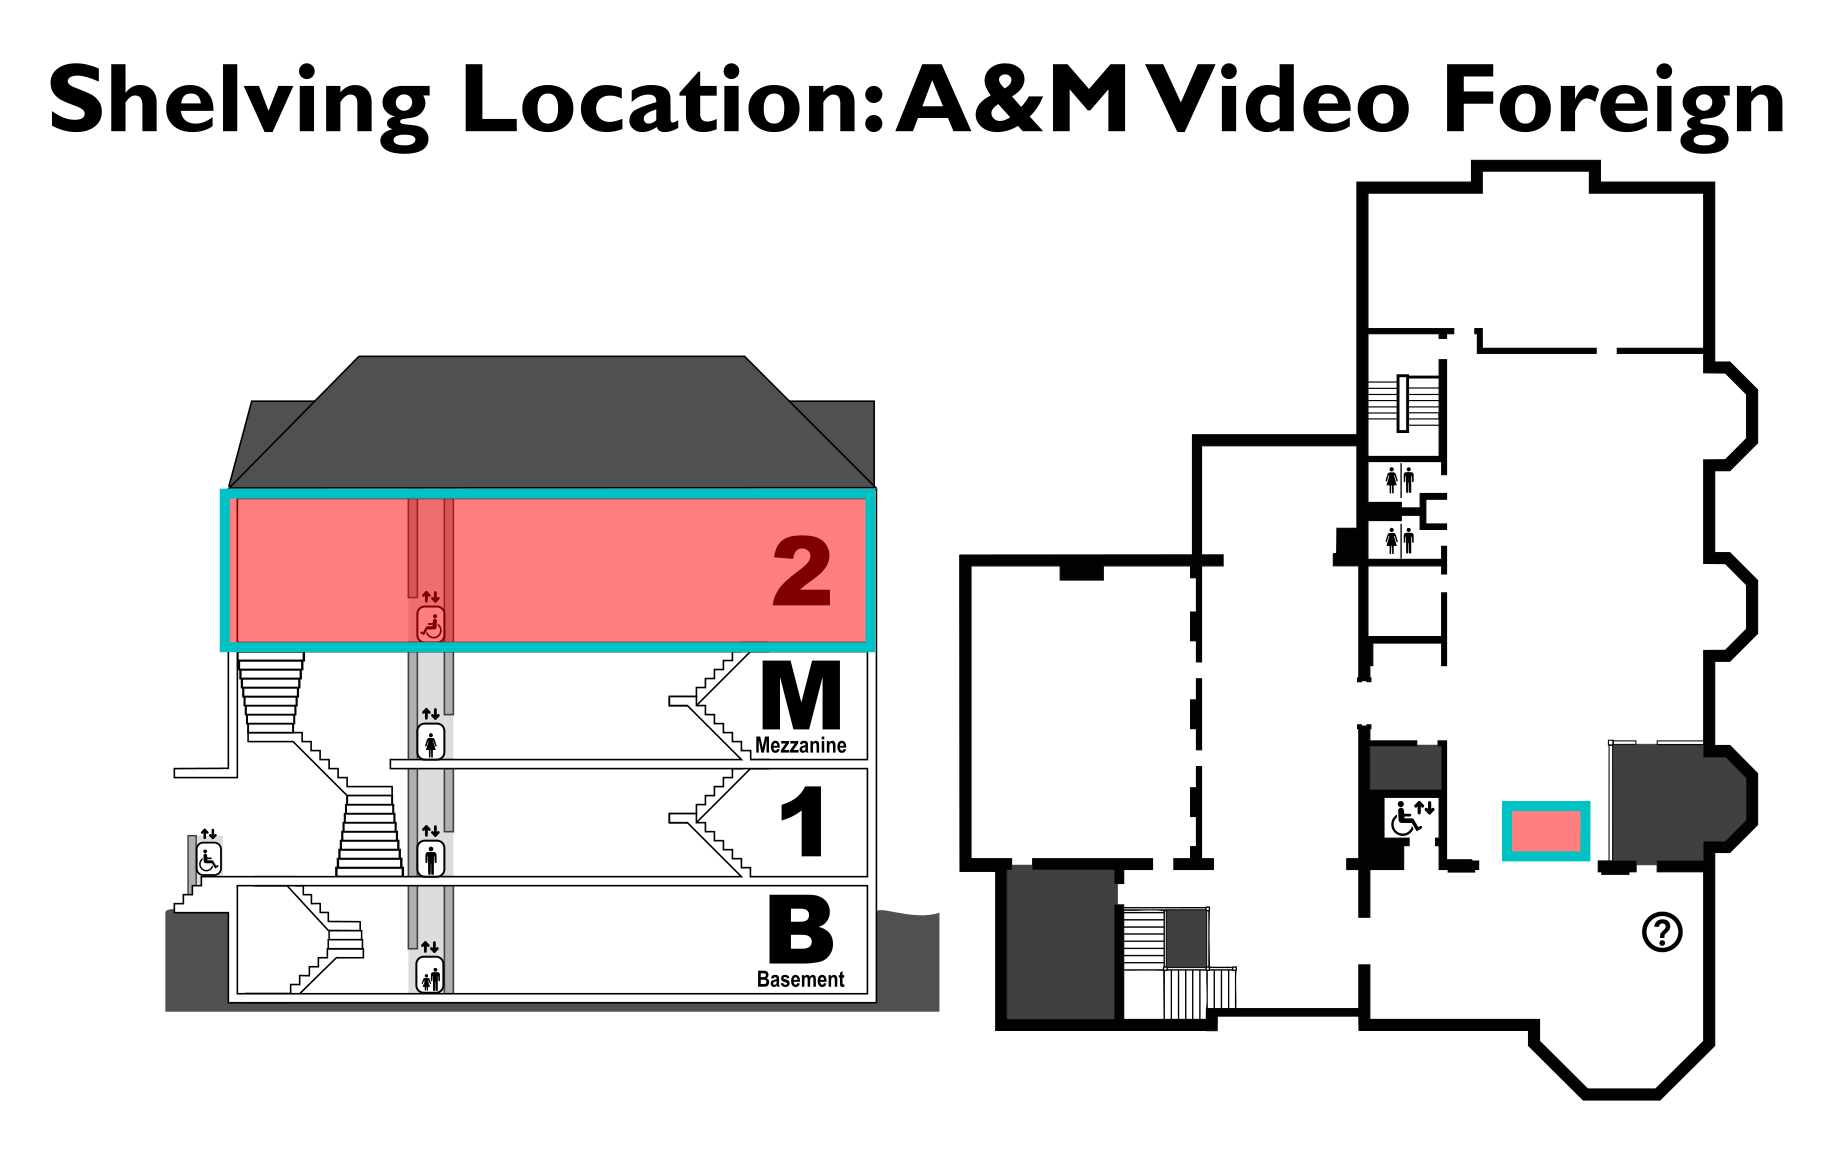 map showing location of A&M Video Foreign shelving location